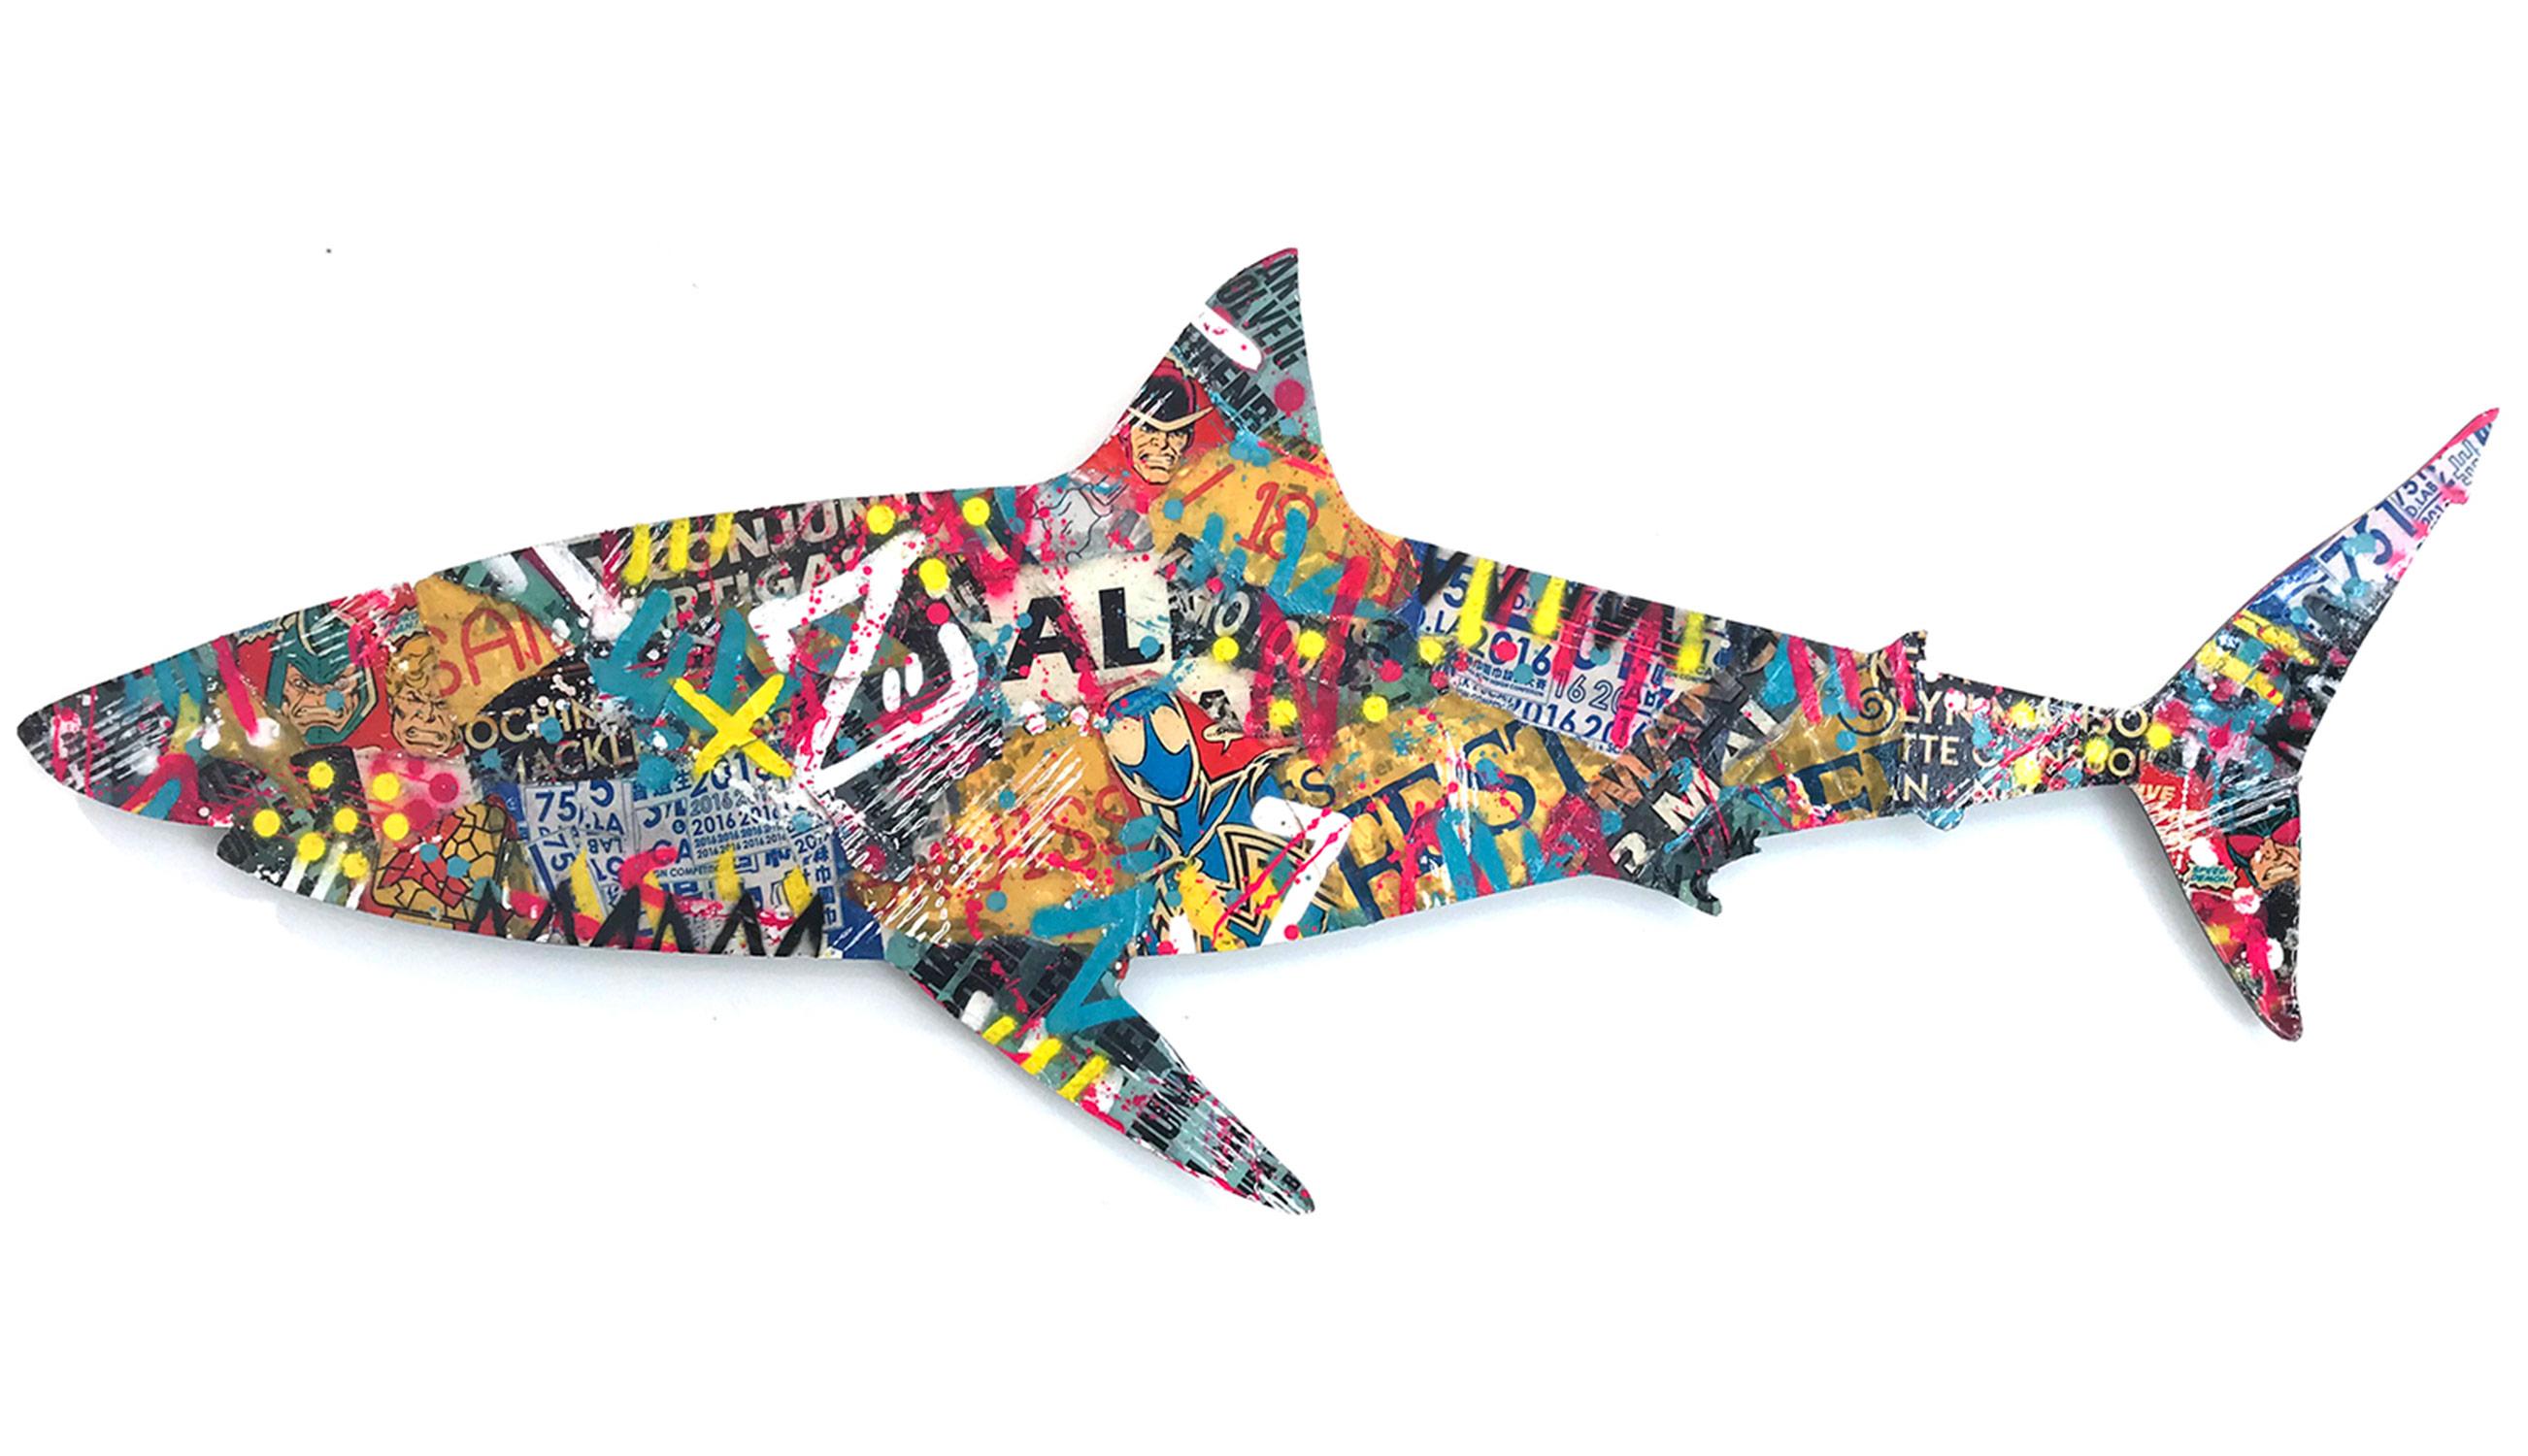 Aiiroh Abstract Painting - "Street Shark" Colorful Mixed Media Work on Dibond by French Street Artist